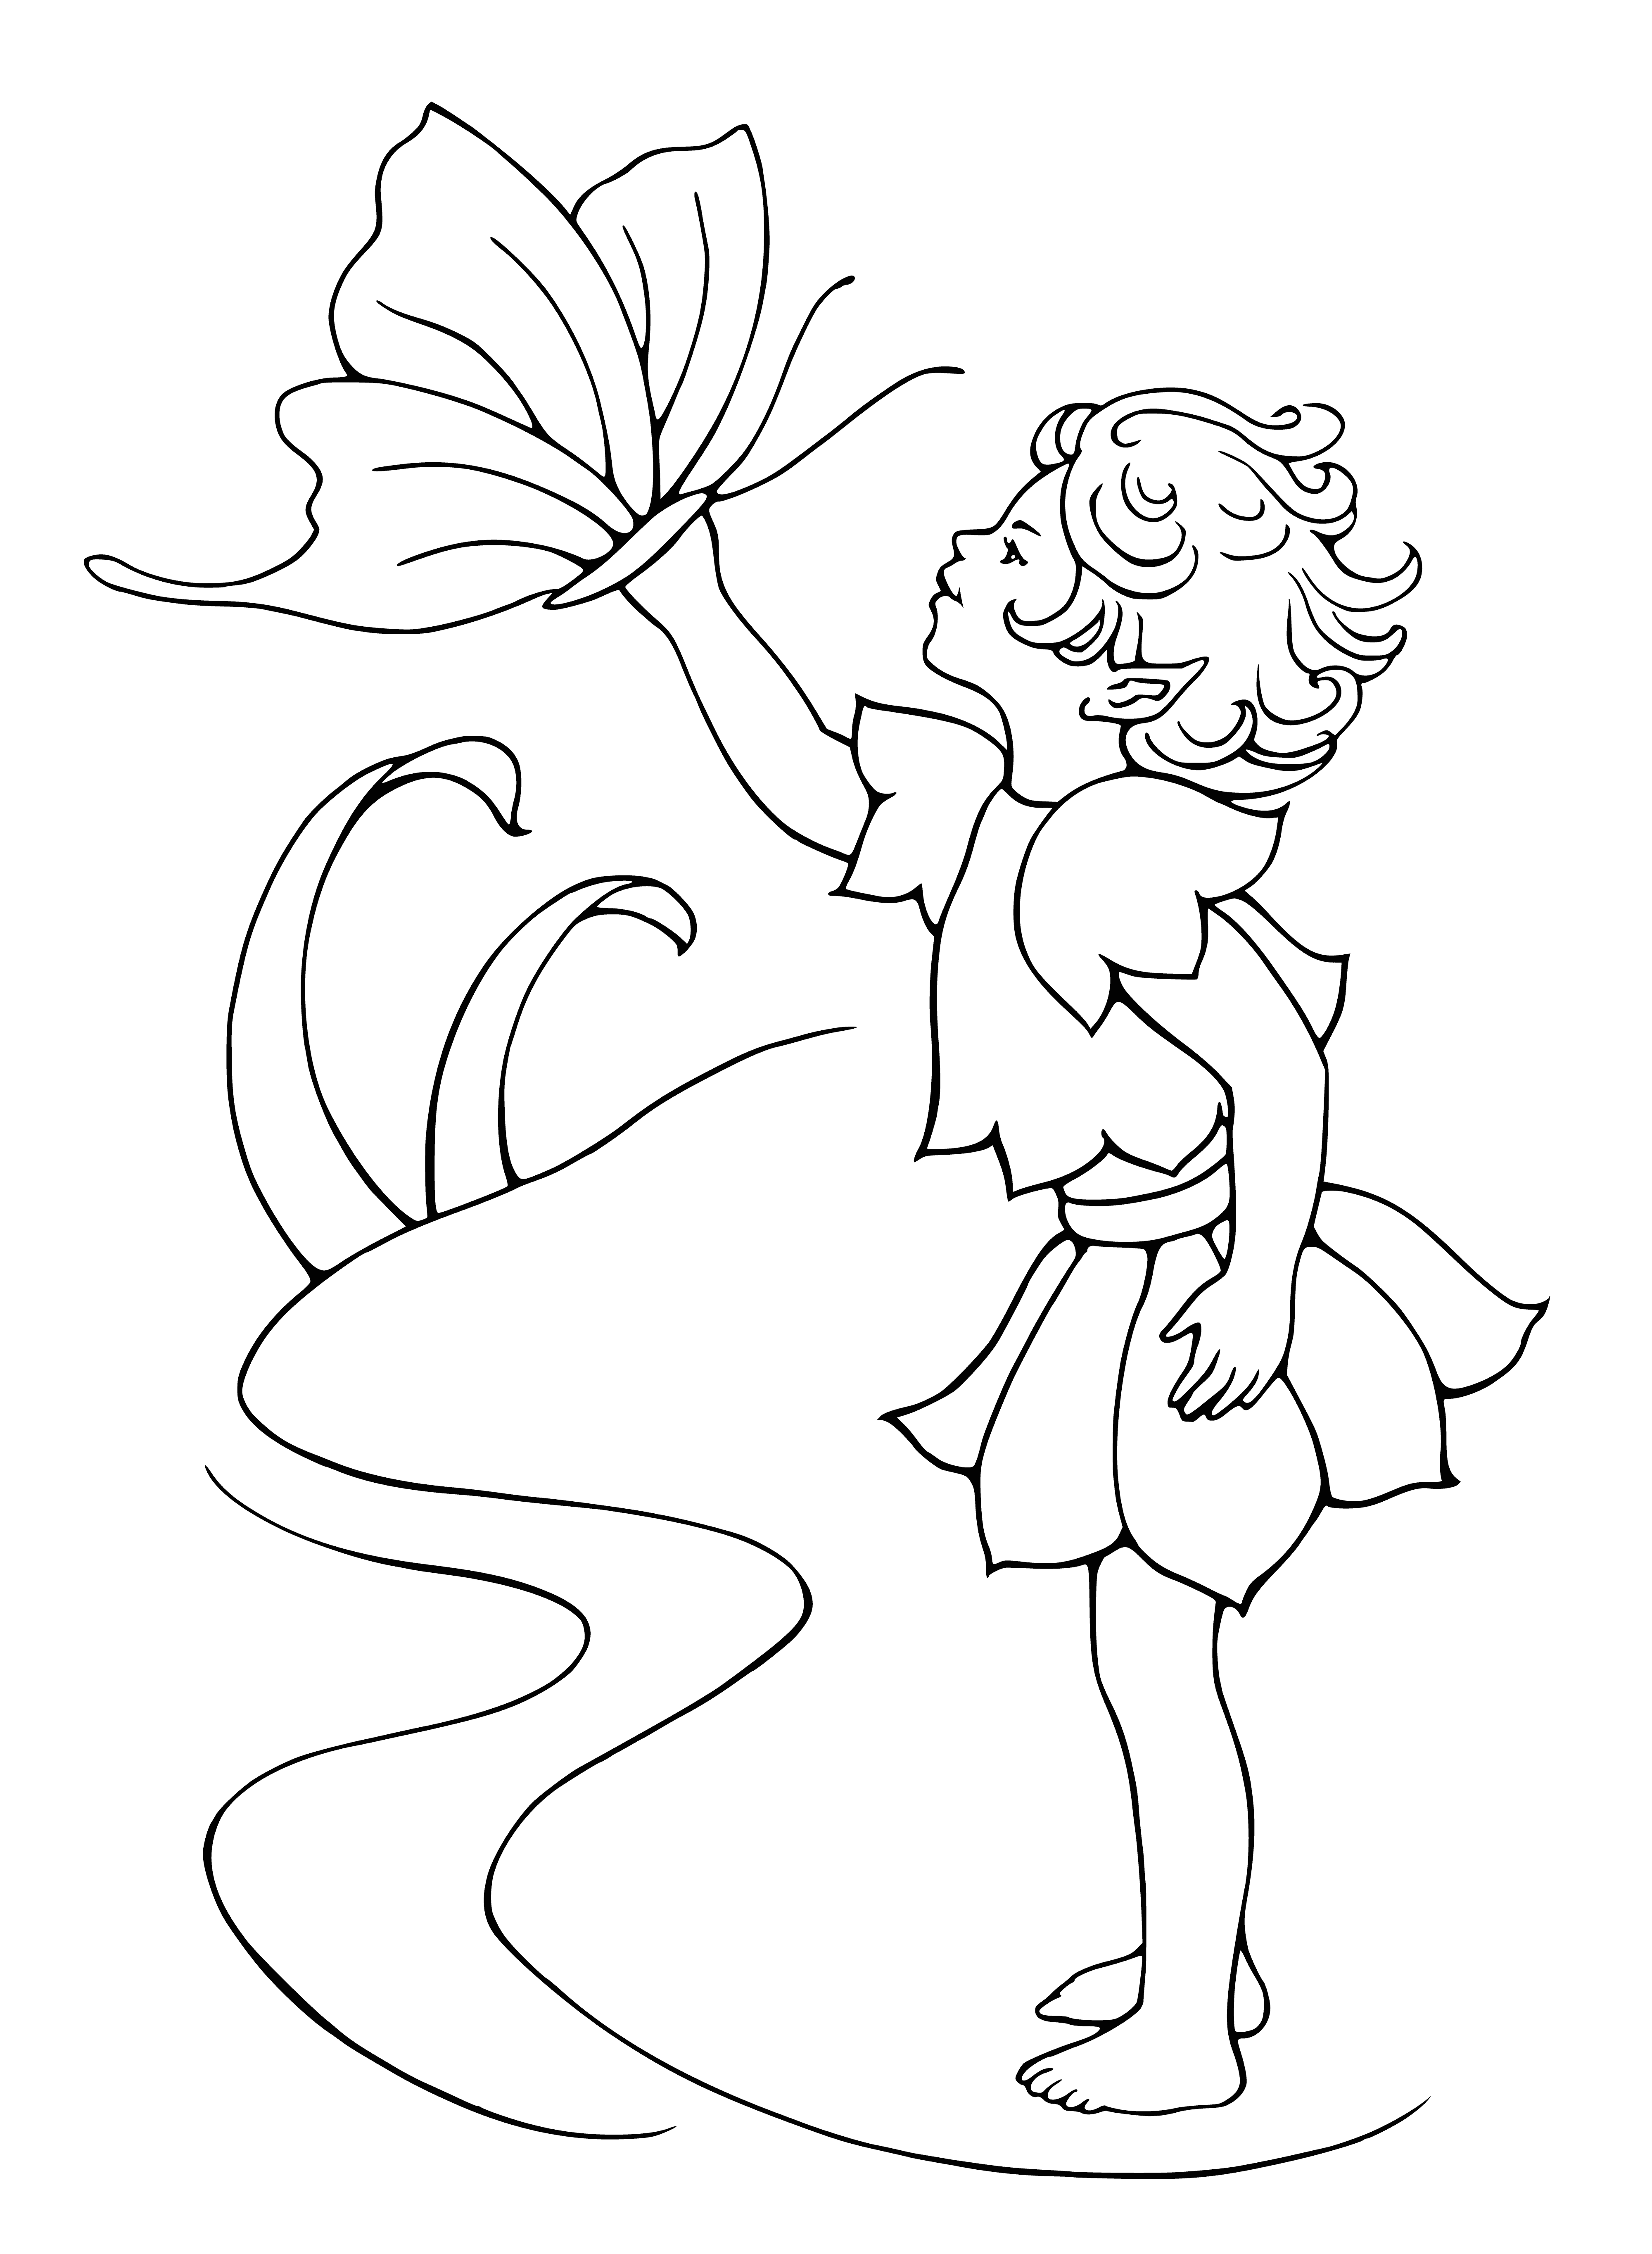 Butterfly on the elf's hand coloring page